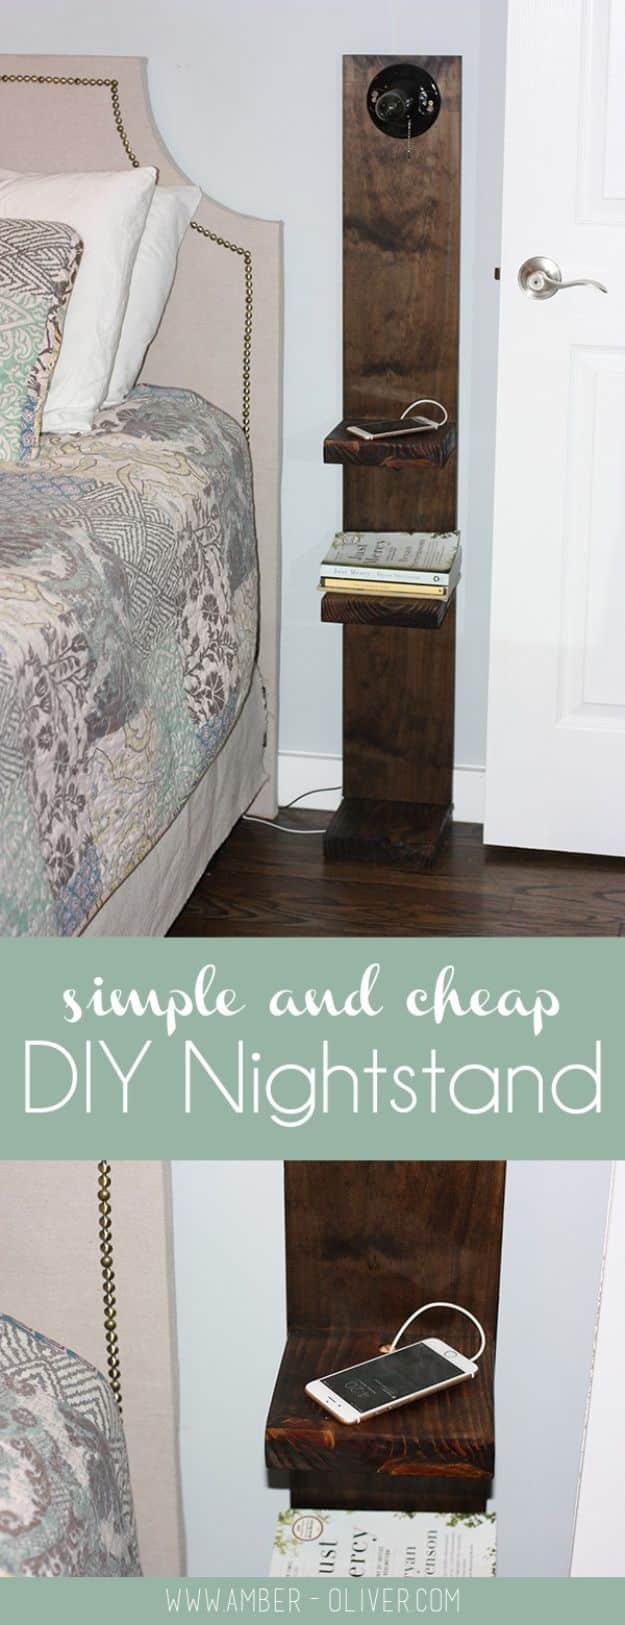 DIY Modern Home Decor - DIY Rustic Nightstand - Room Ideas, Wall Art on A Budget, Farmhouse Style Projects - Easy DIY Ideas and Decorations for Apartments, Living Room, Bedroom, Kitchen and Bath - Fixer Upper Tips and Tricks 